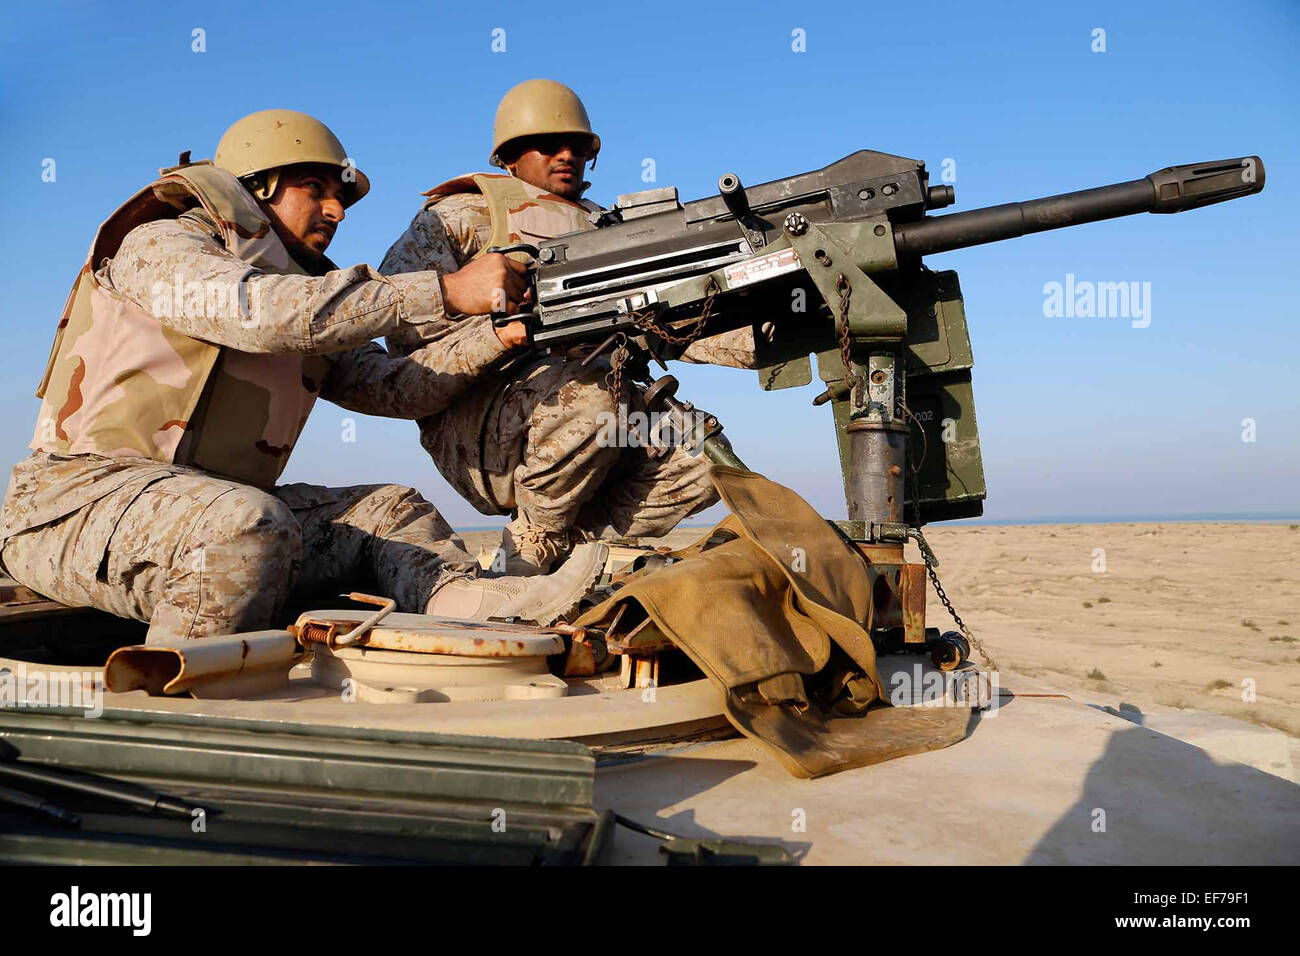 A Saudi Marine fires a Mk19 grenade launcher during a joint machine gun live fire exercise with U.S. Marines as part of exercise Red Reef December 11, 2014 in Ras Al Khair, Saudi Arabia. Stock Photo